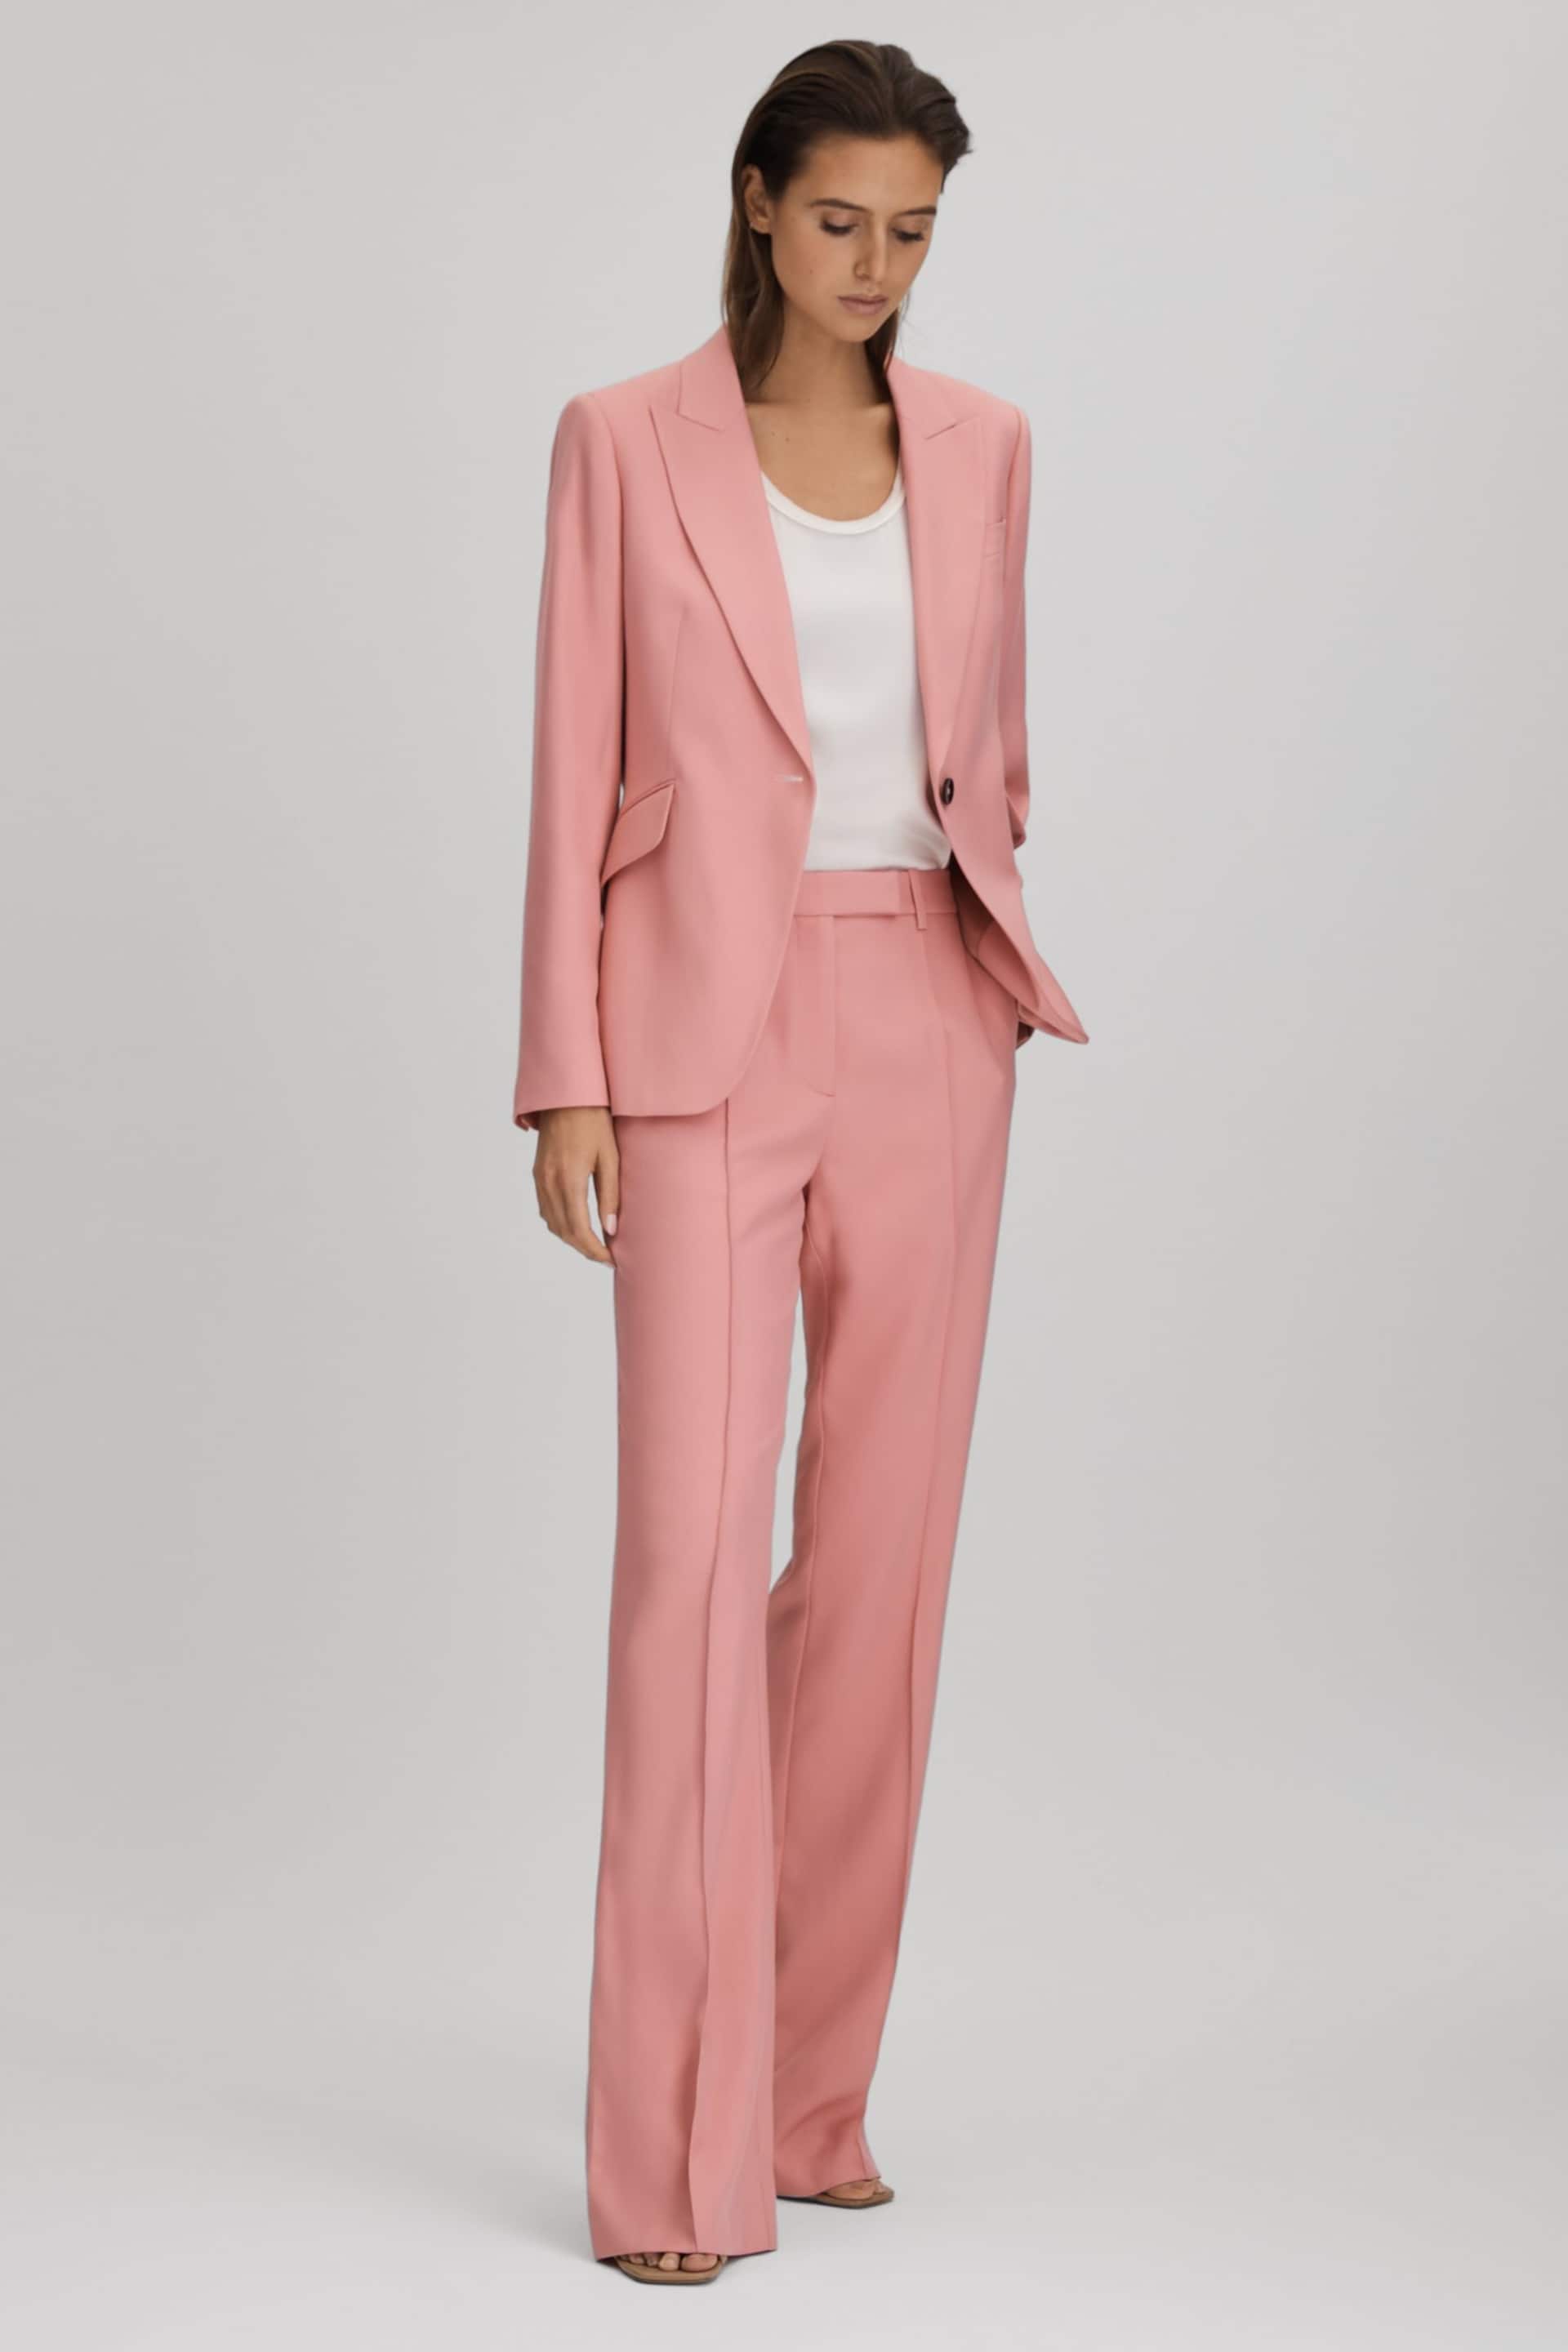 Reiss Pink Millie Flared Suit Trousers - Image 6 of 6